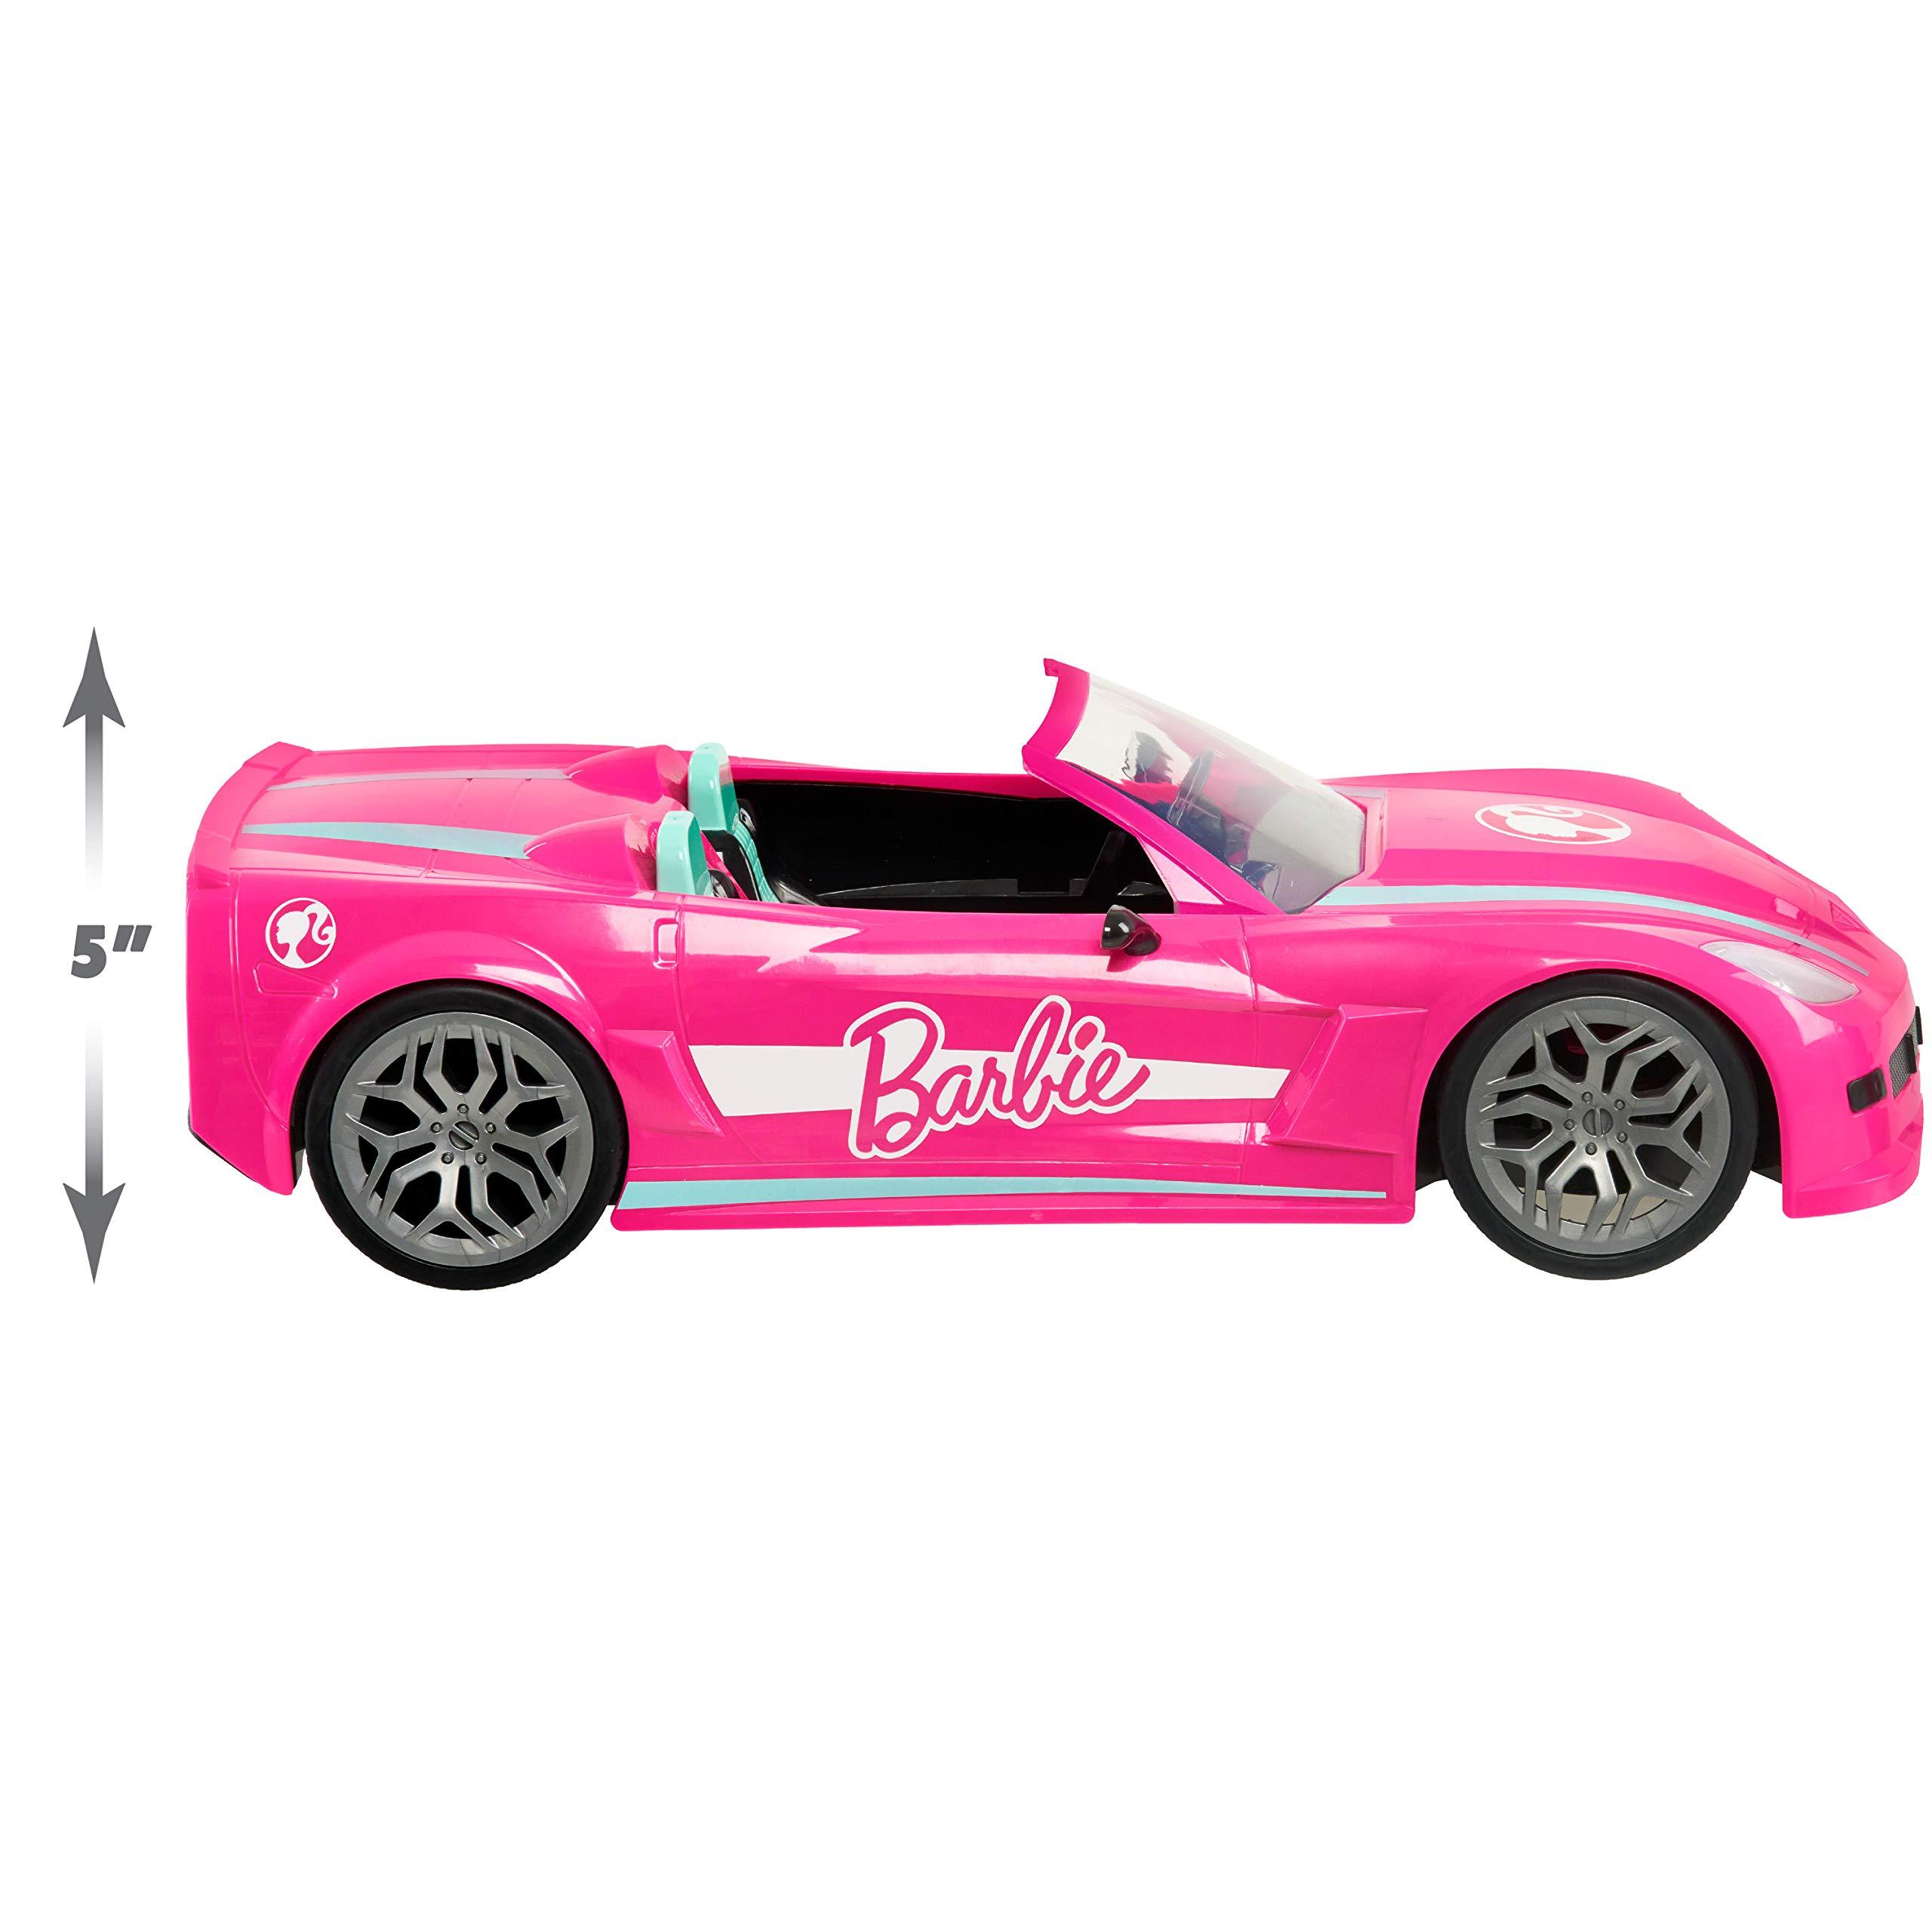 Barbie Rc: Lightweight, Durable, and Fun: The Barbie RC Car for Kids